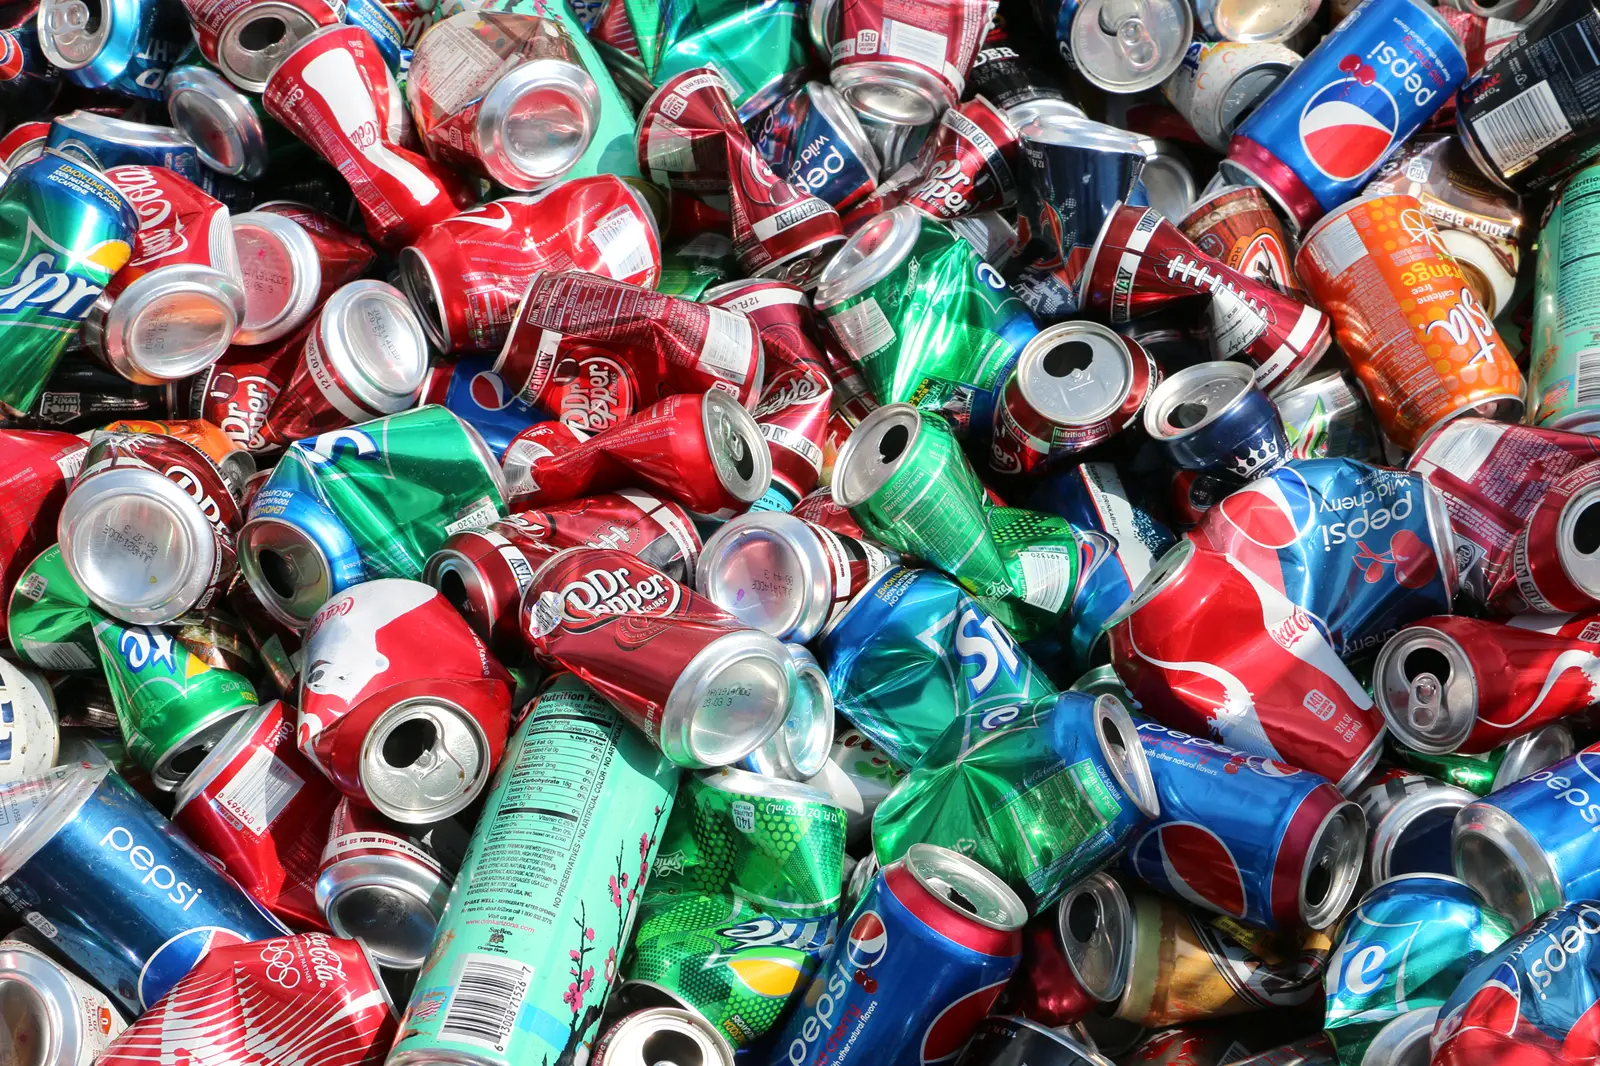 How Much Money Do You Get for Recycling Aluminum Cans in 2021?